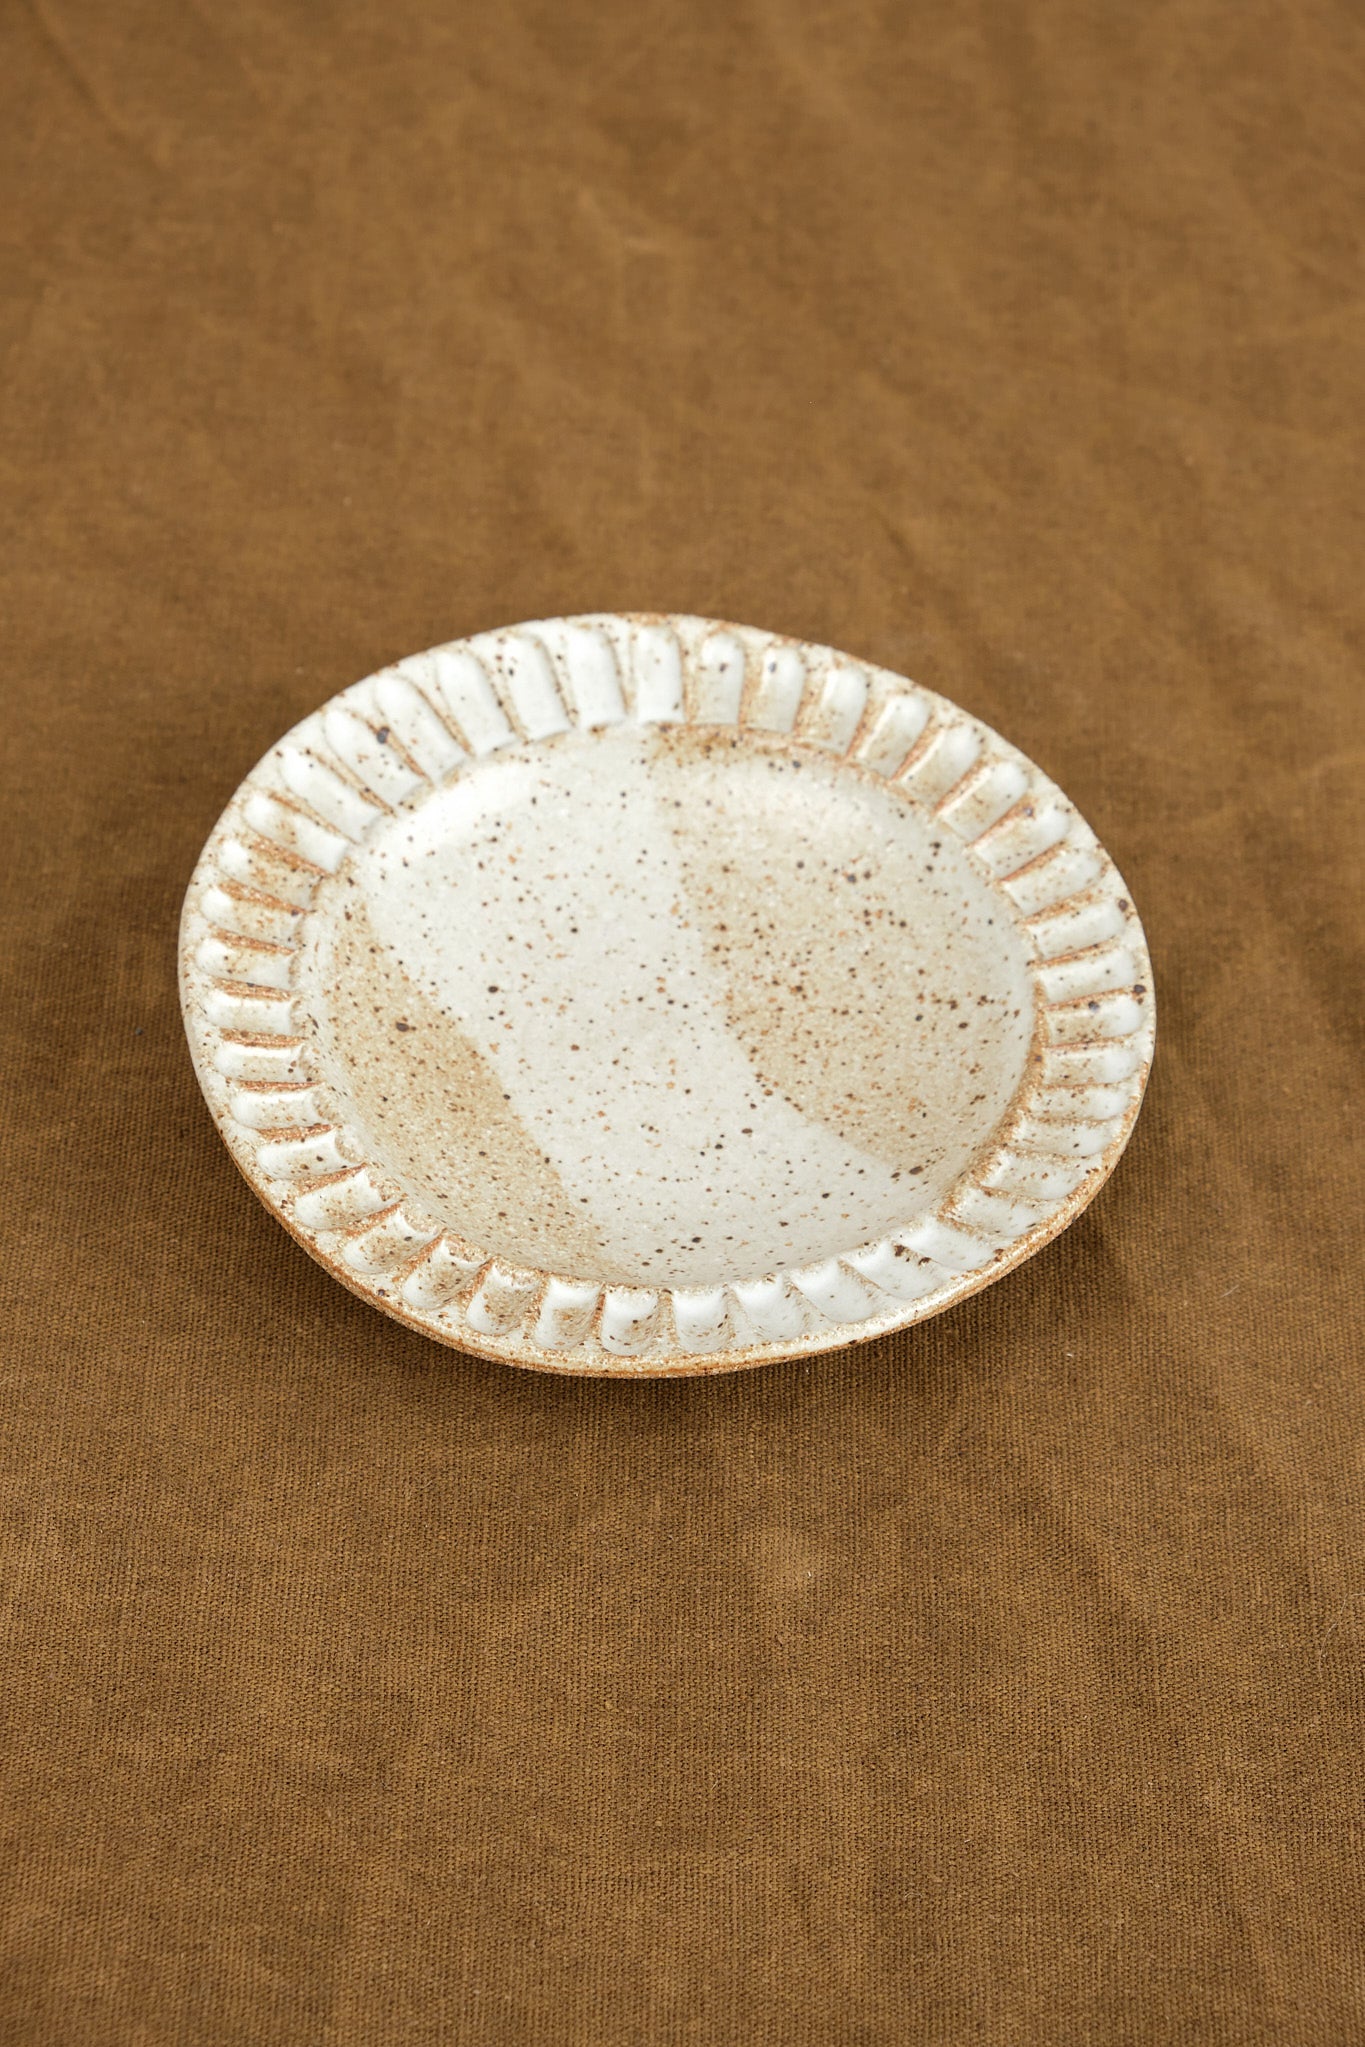 Mt. Washington Pottery 4" Mini Fluted Dish in speckled white